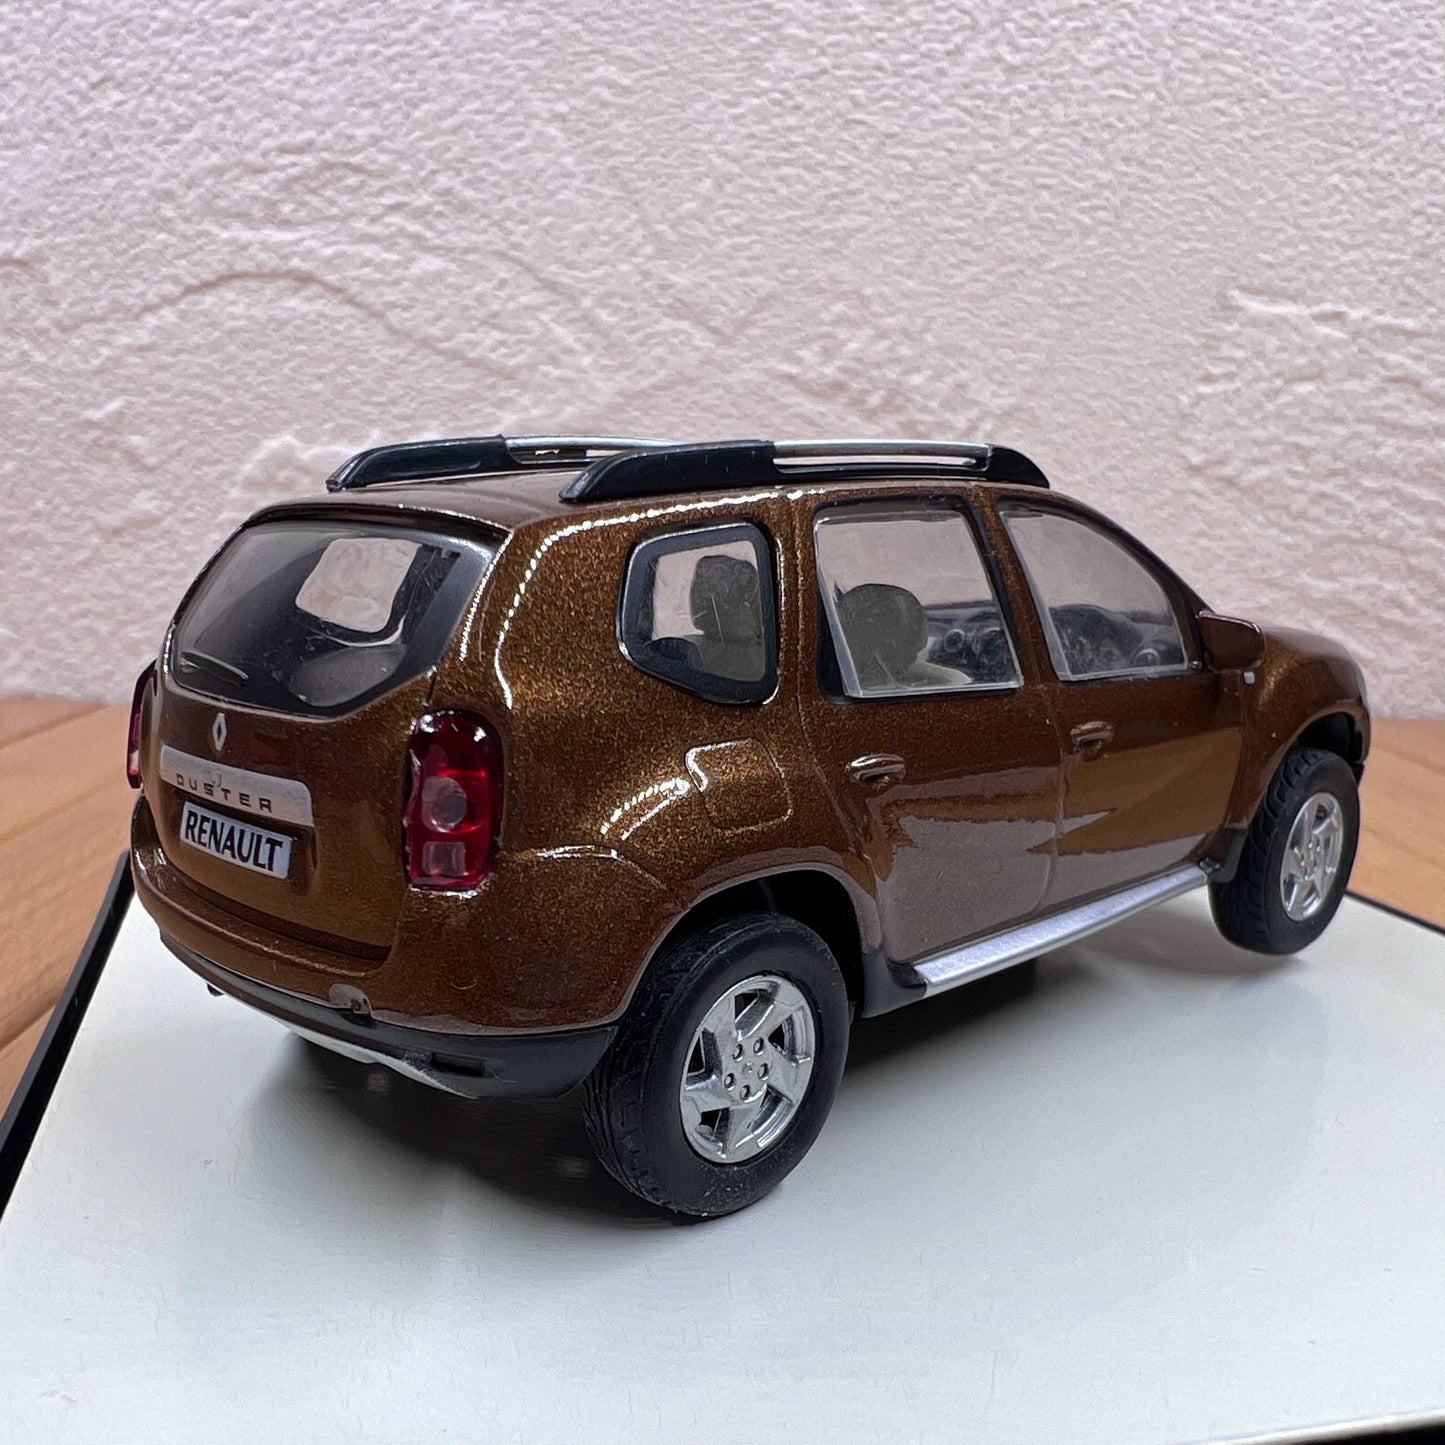 1/43 Scale Renault Duster Diecast Model Car